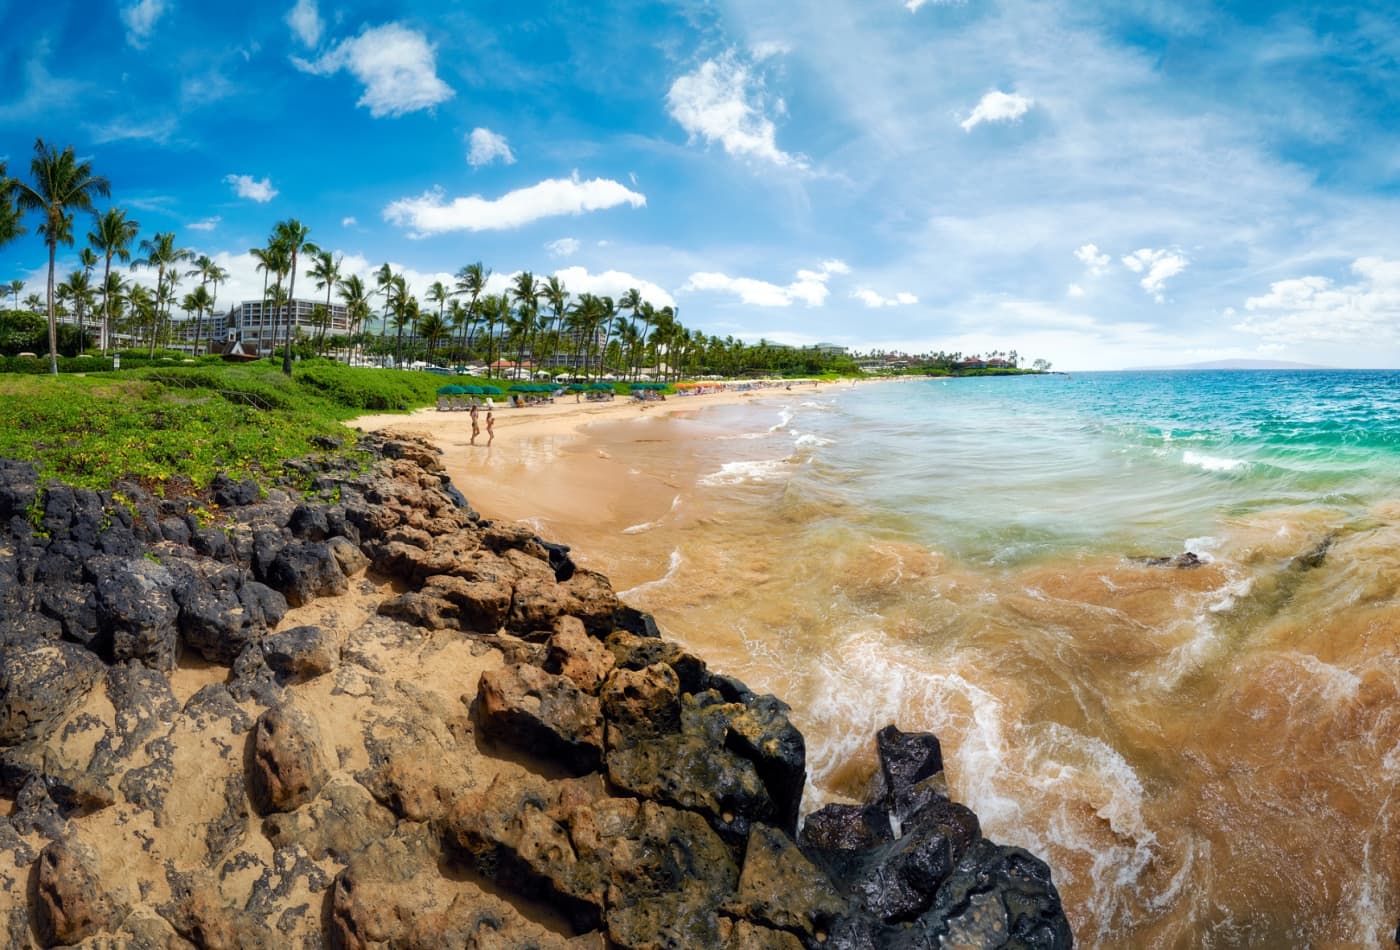 Travel guide: Where to save and splurge in Maui, Hawaii